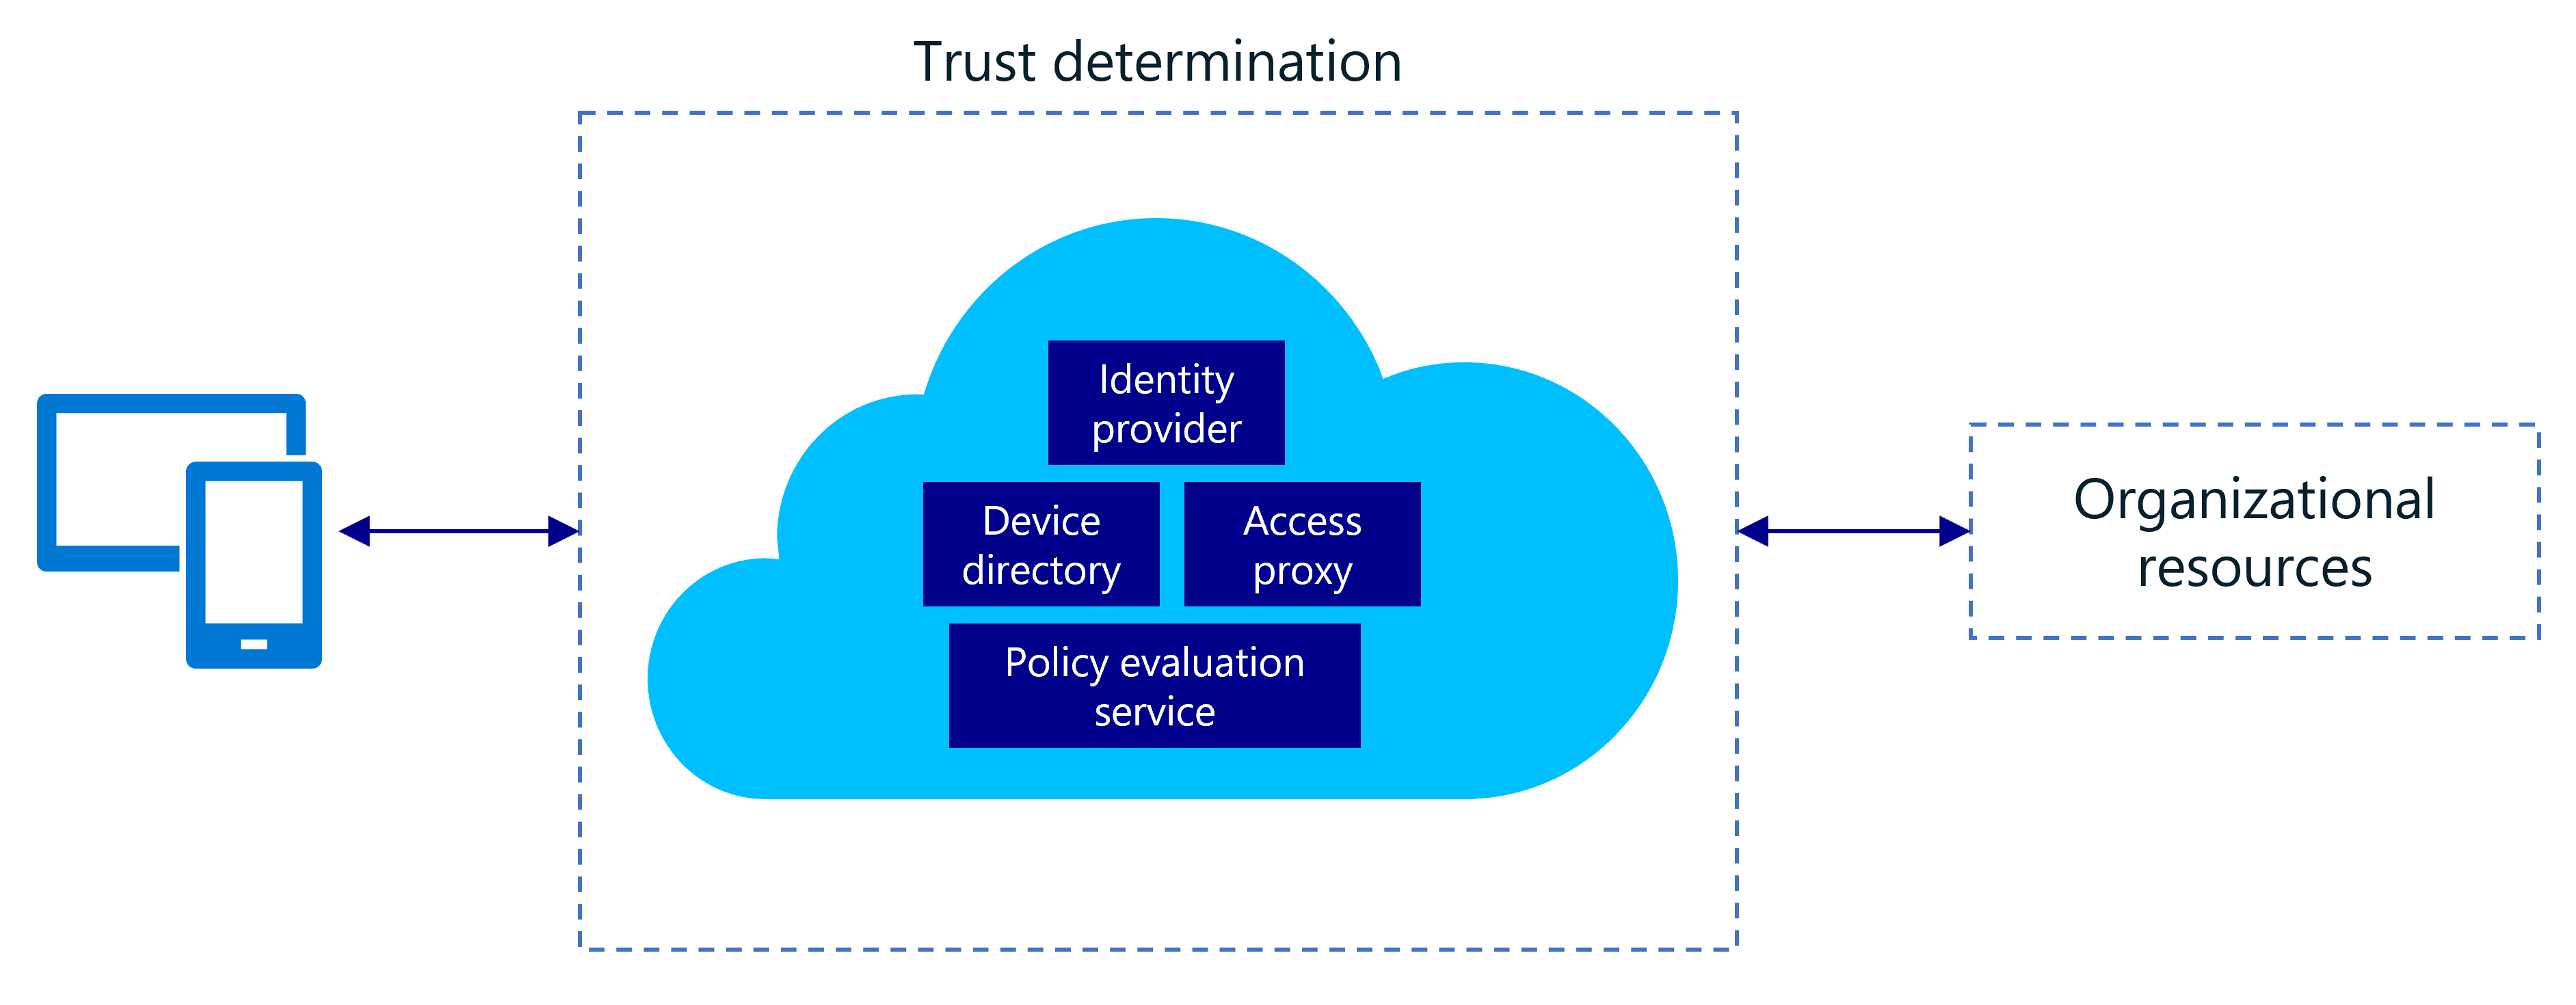 Diagram showing the Zero Trust network model comprised of an identity provider, device directory, access proxy, and policy evaluation service.